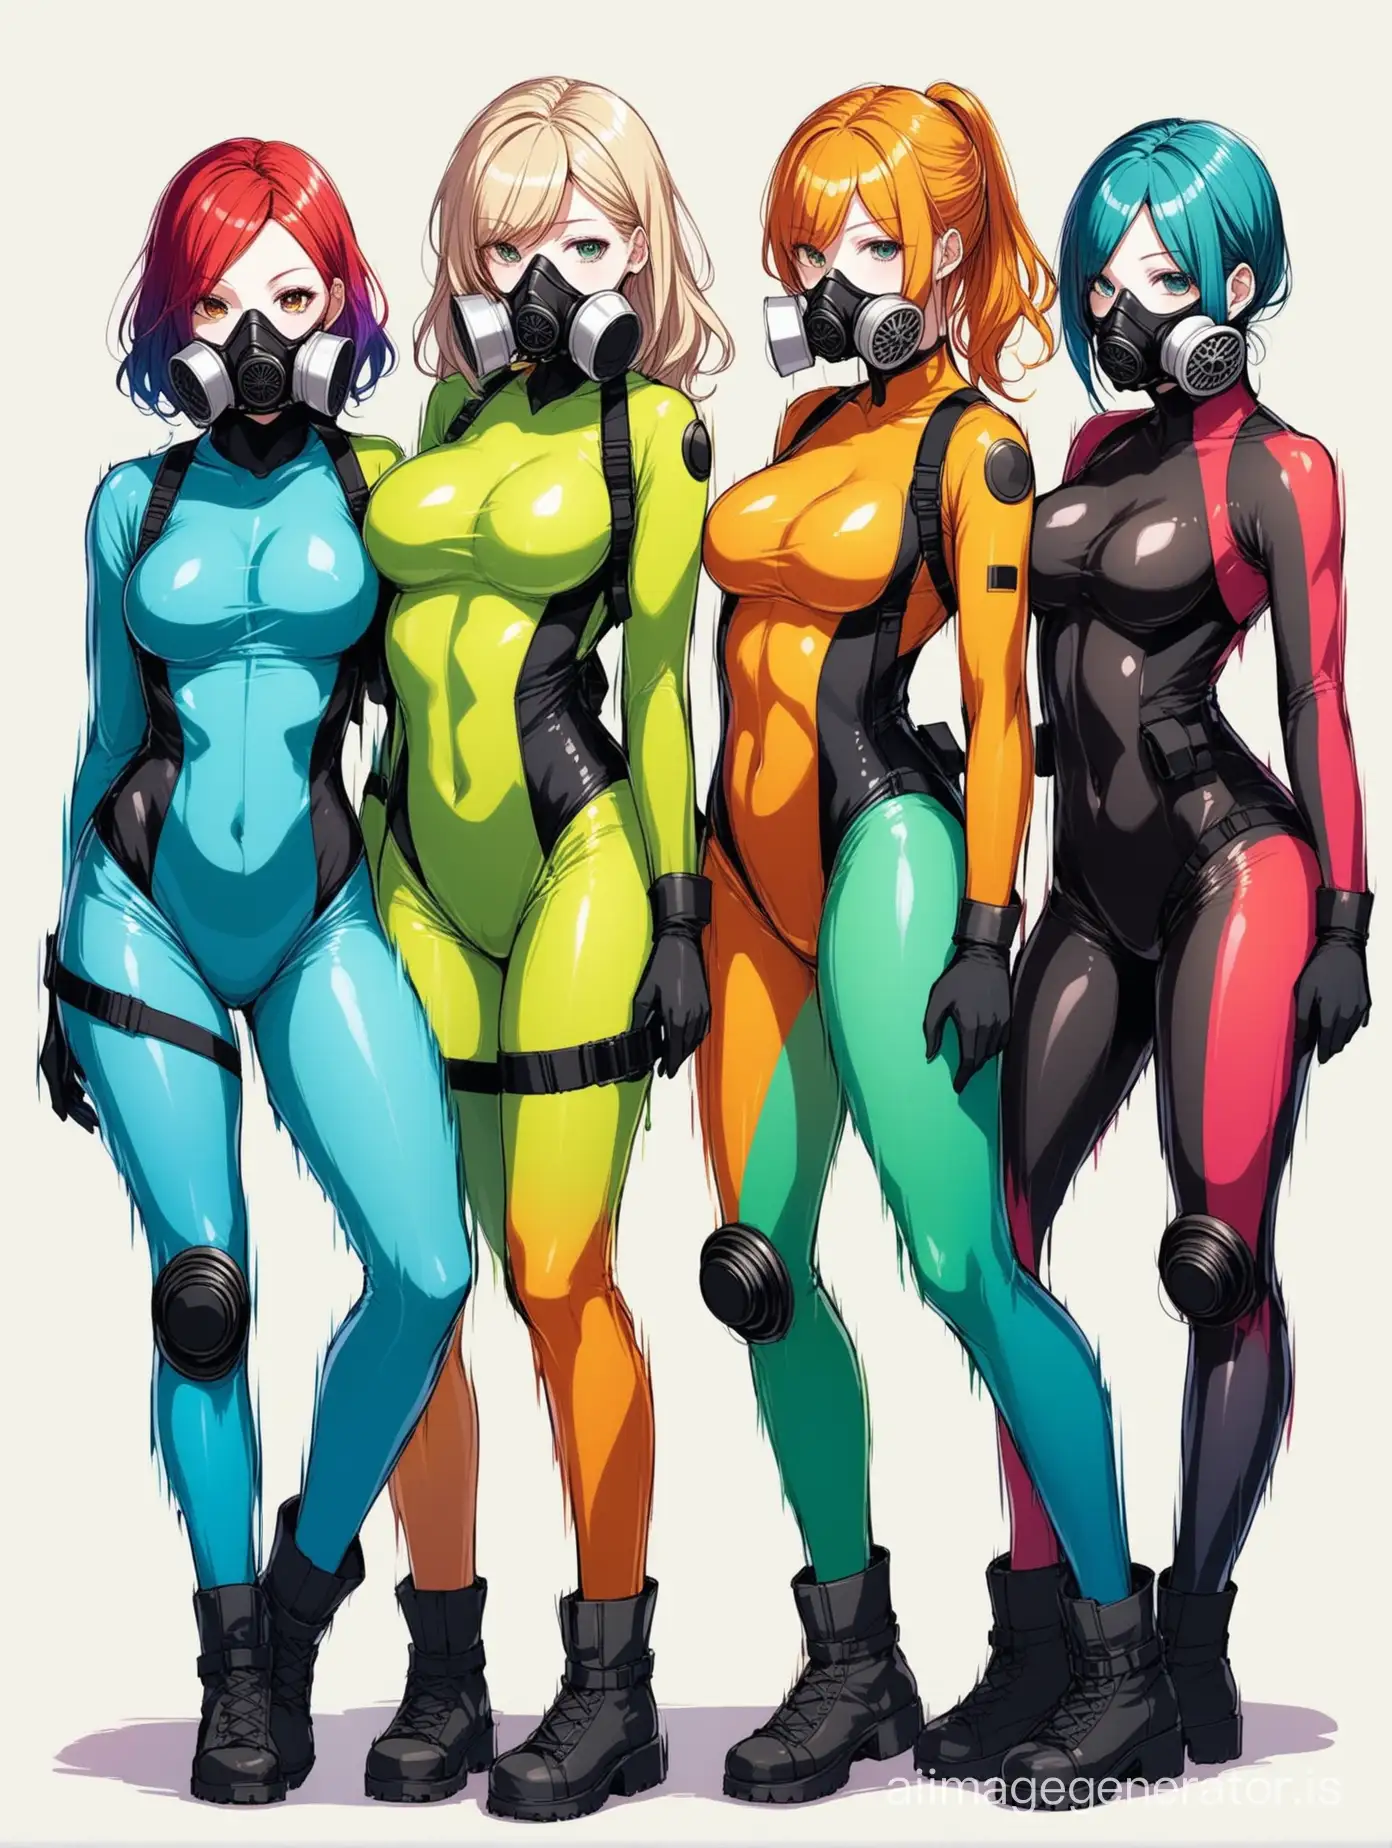 Four girls,all have different hair styles and colors, wearing multicolored bodysuit and gas mask, 